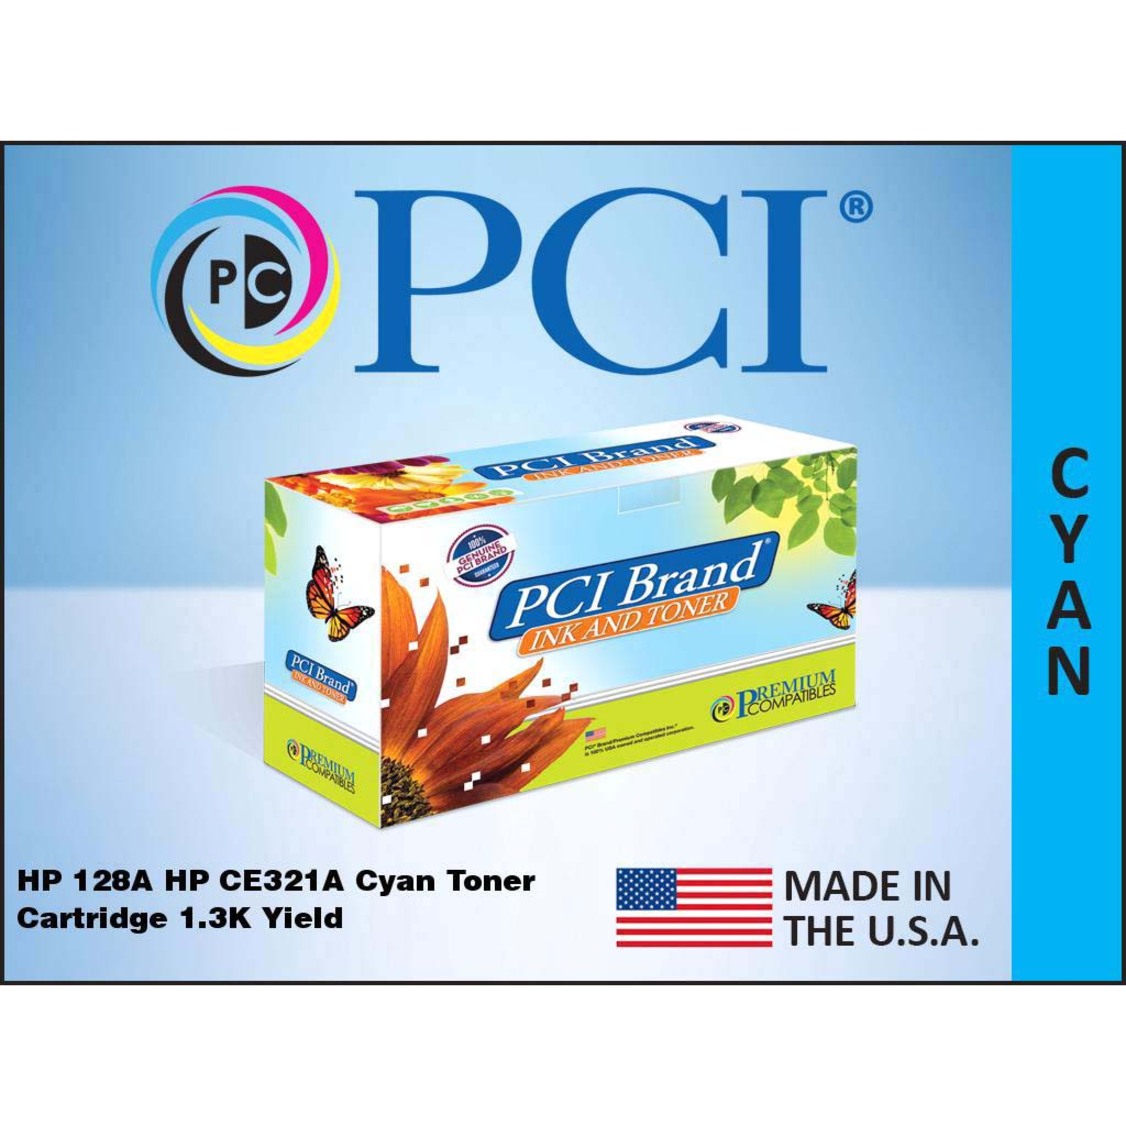 Premium Compatibles CE321ARPC HP 128A Cyan Toner Ctg 1.3K Yield, Made in the USA for CP1525, CM1415